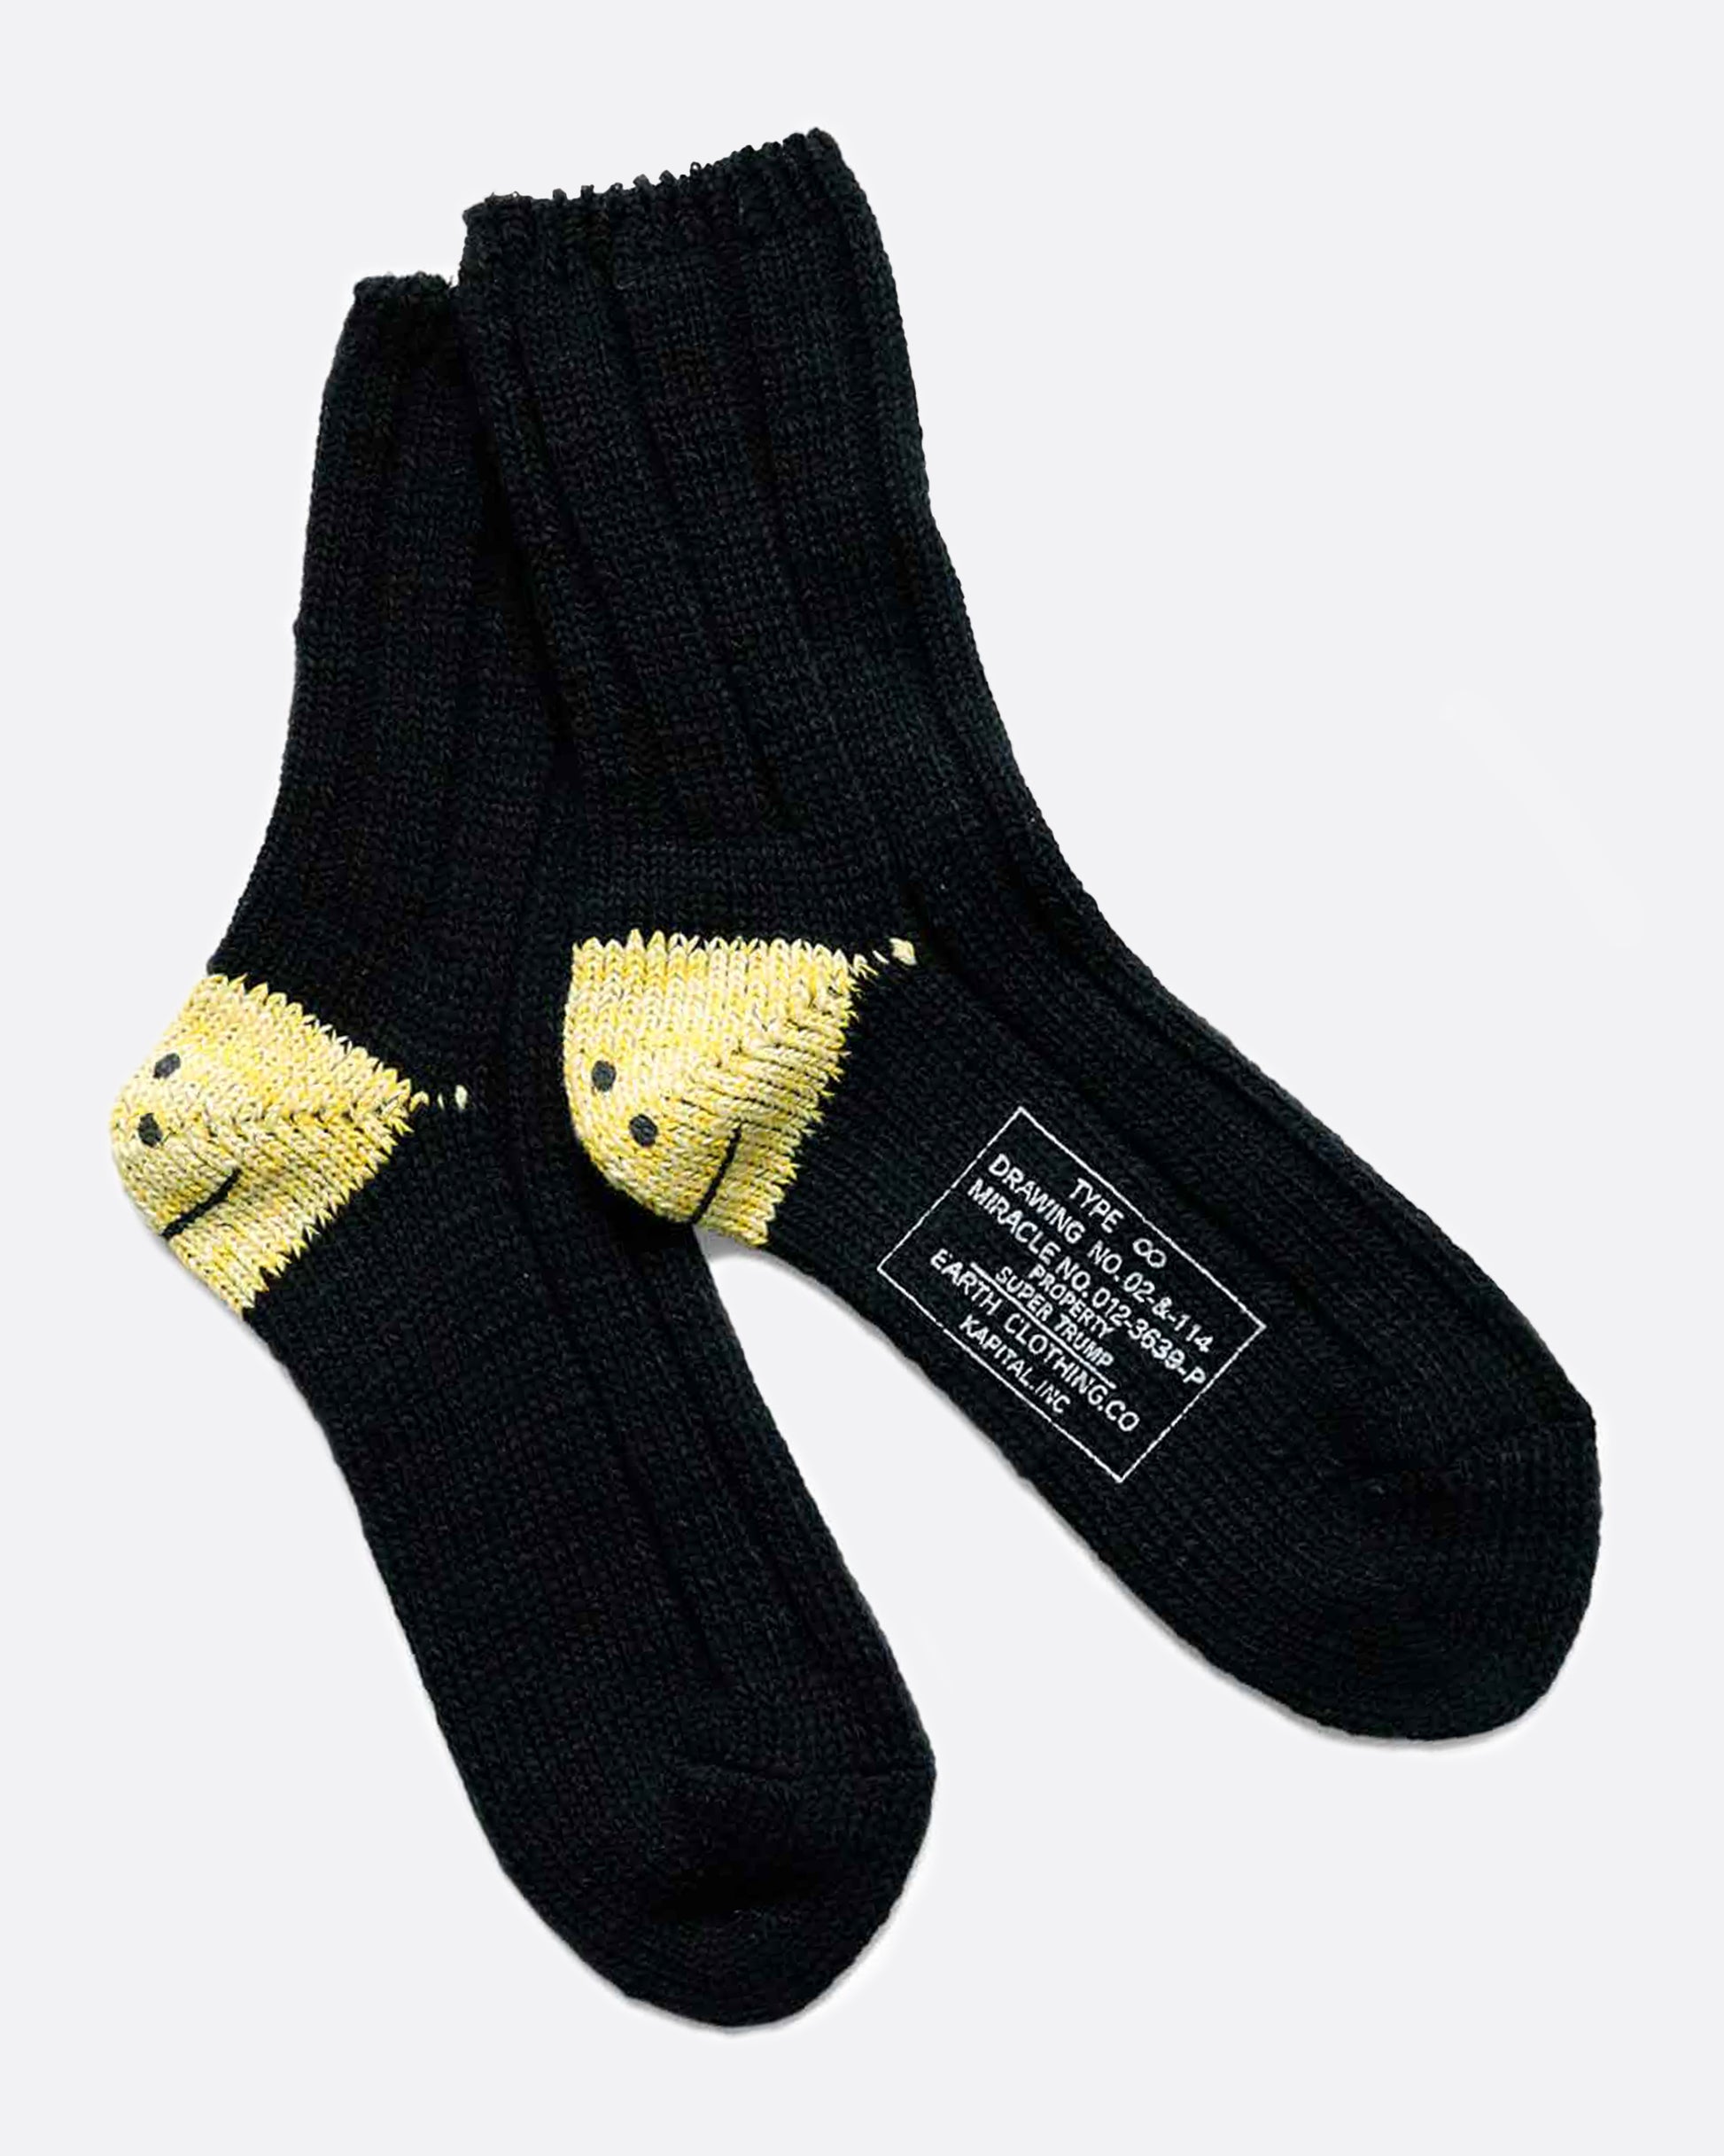 Everyone's favorite smiley socks, this time in a stretchy, breathable cotton blend.